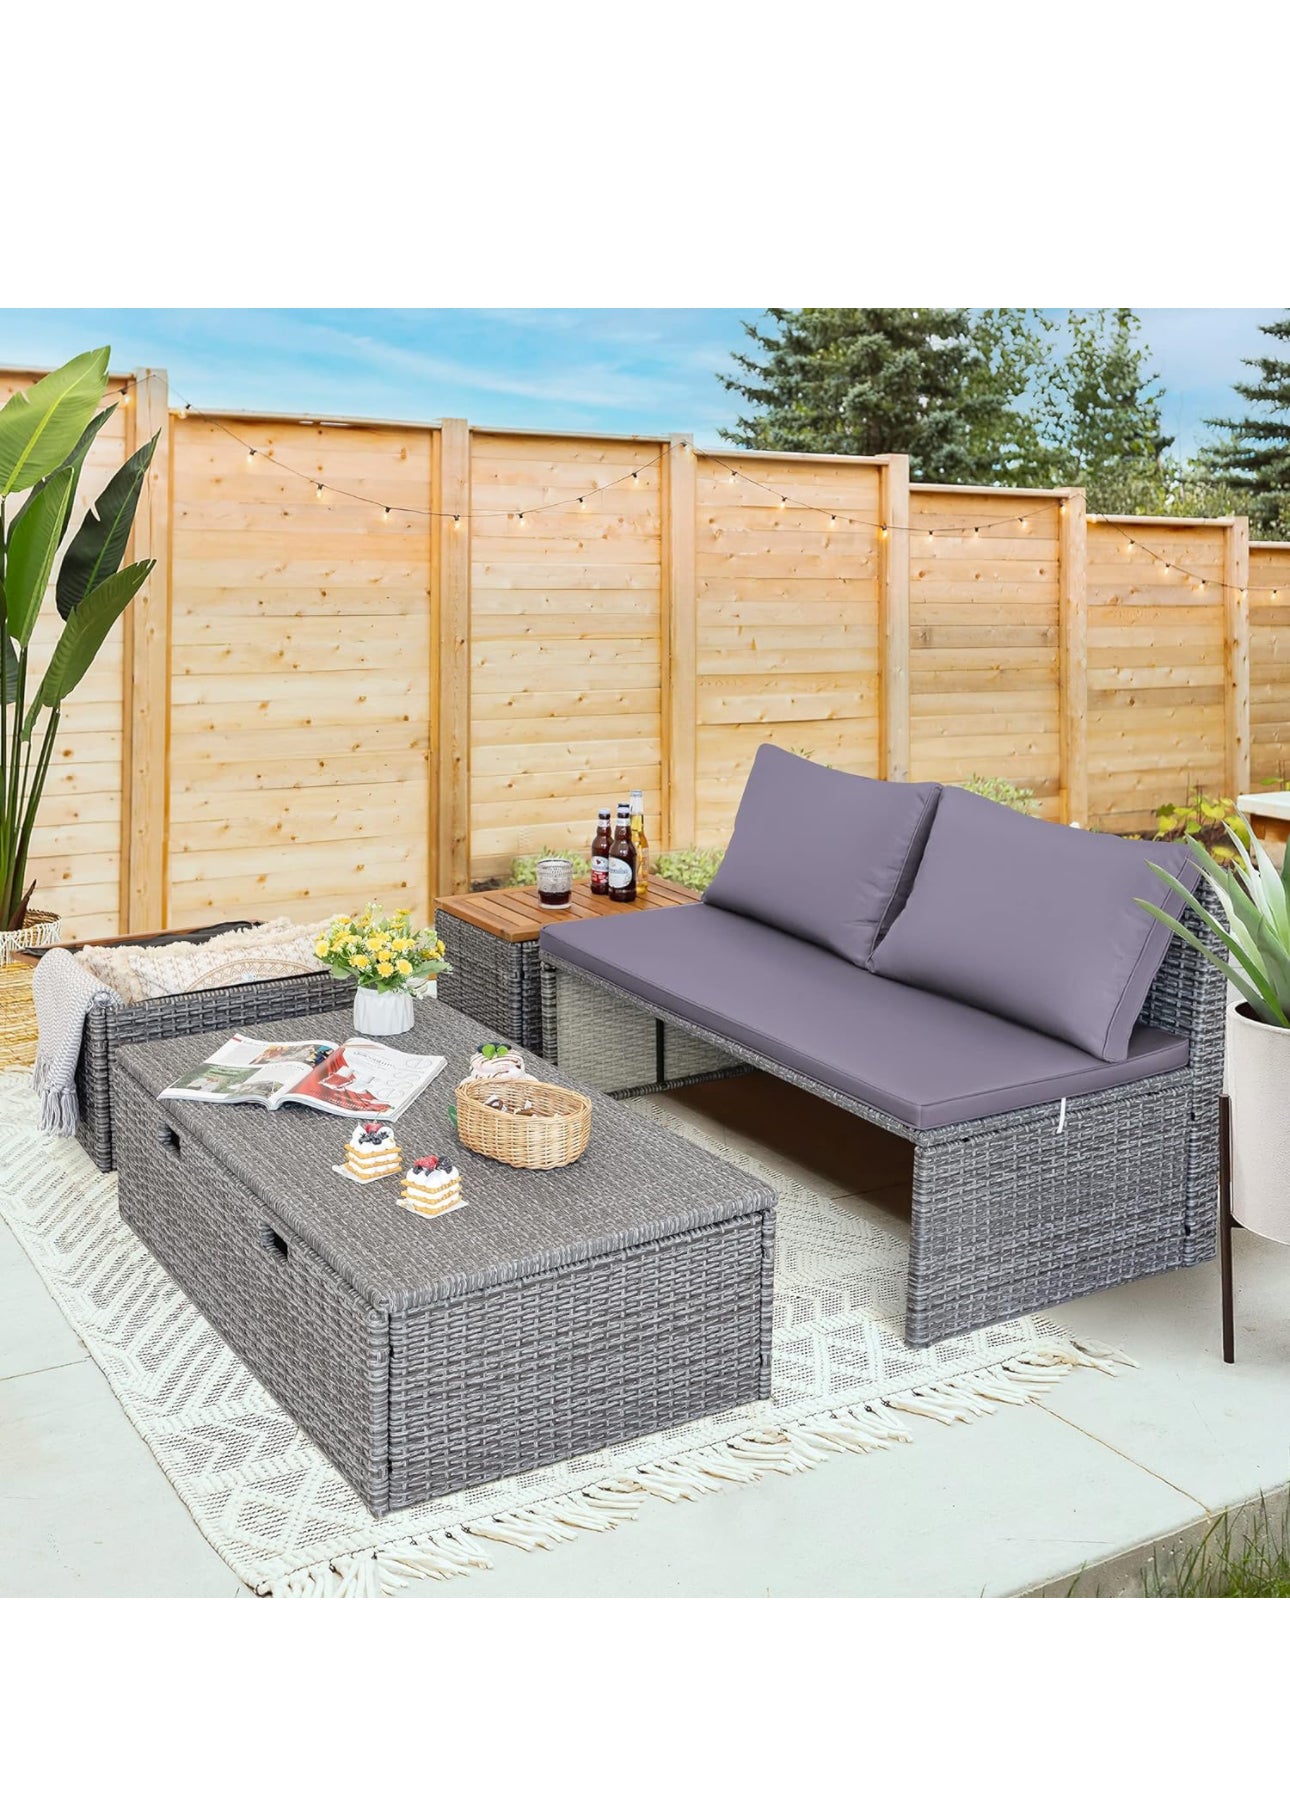 Outdoor patio loveseat with lounge and storage 2 side tables modular